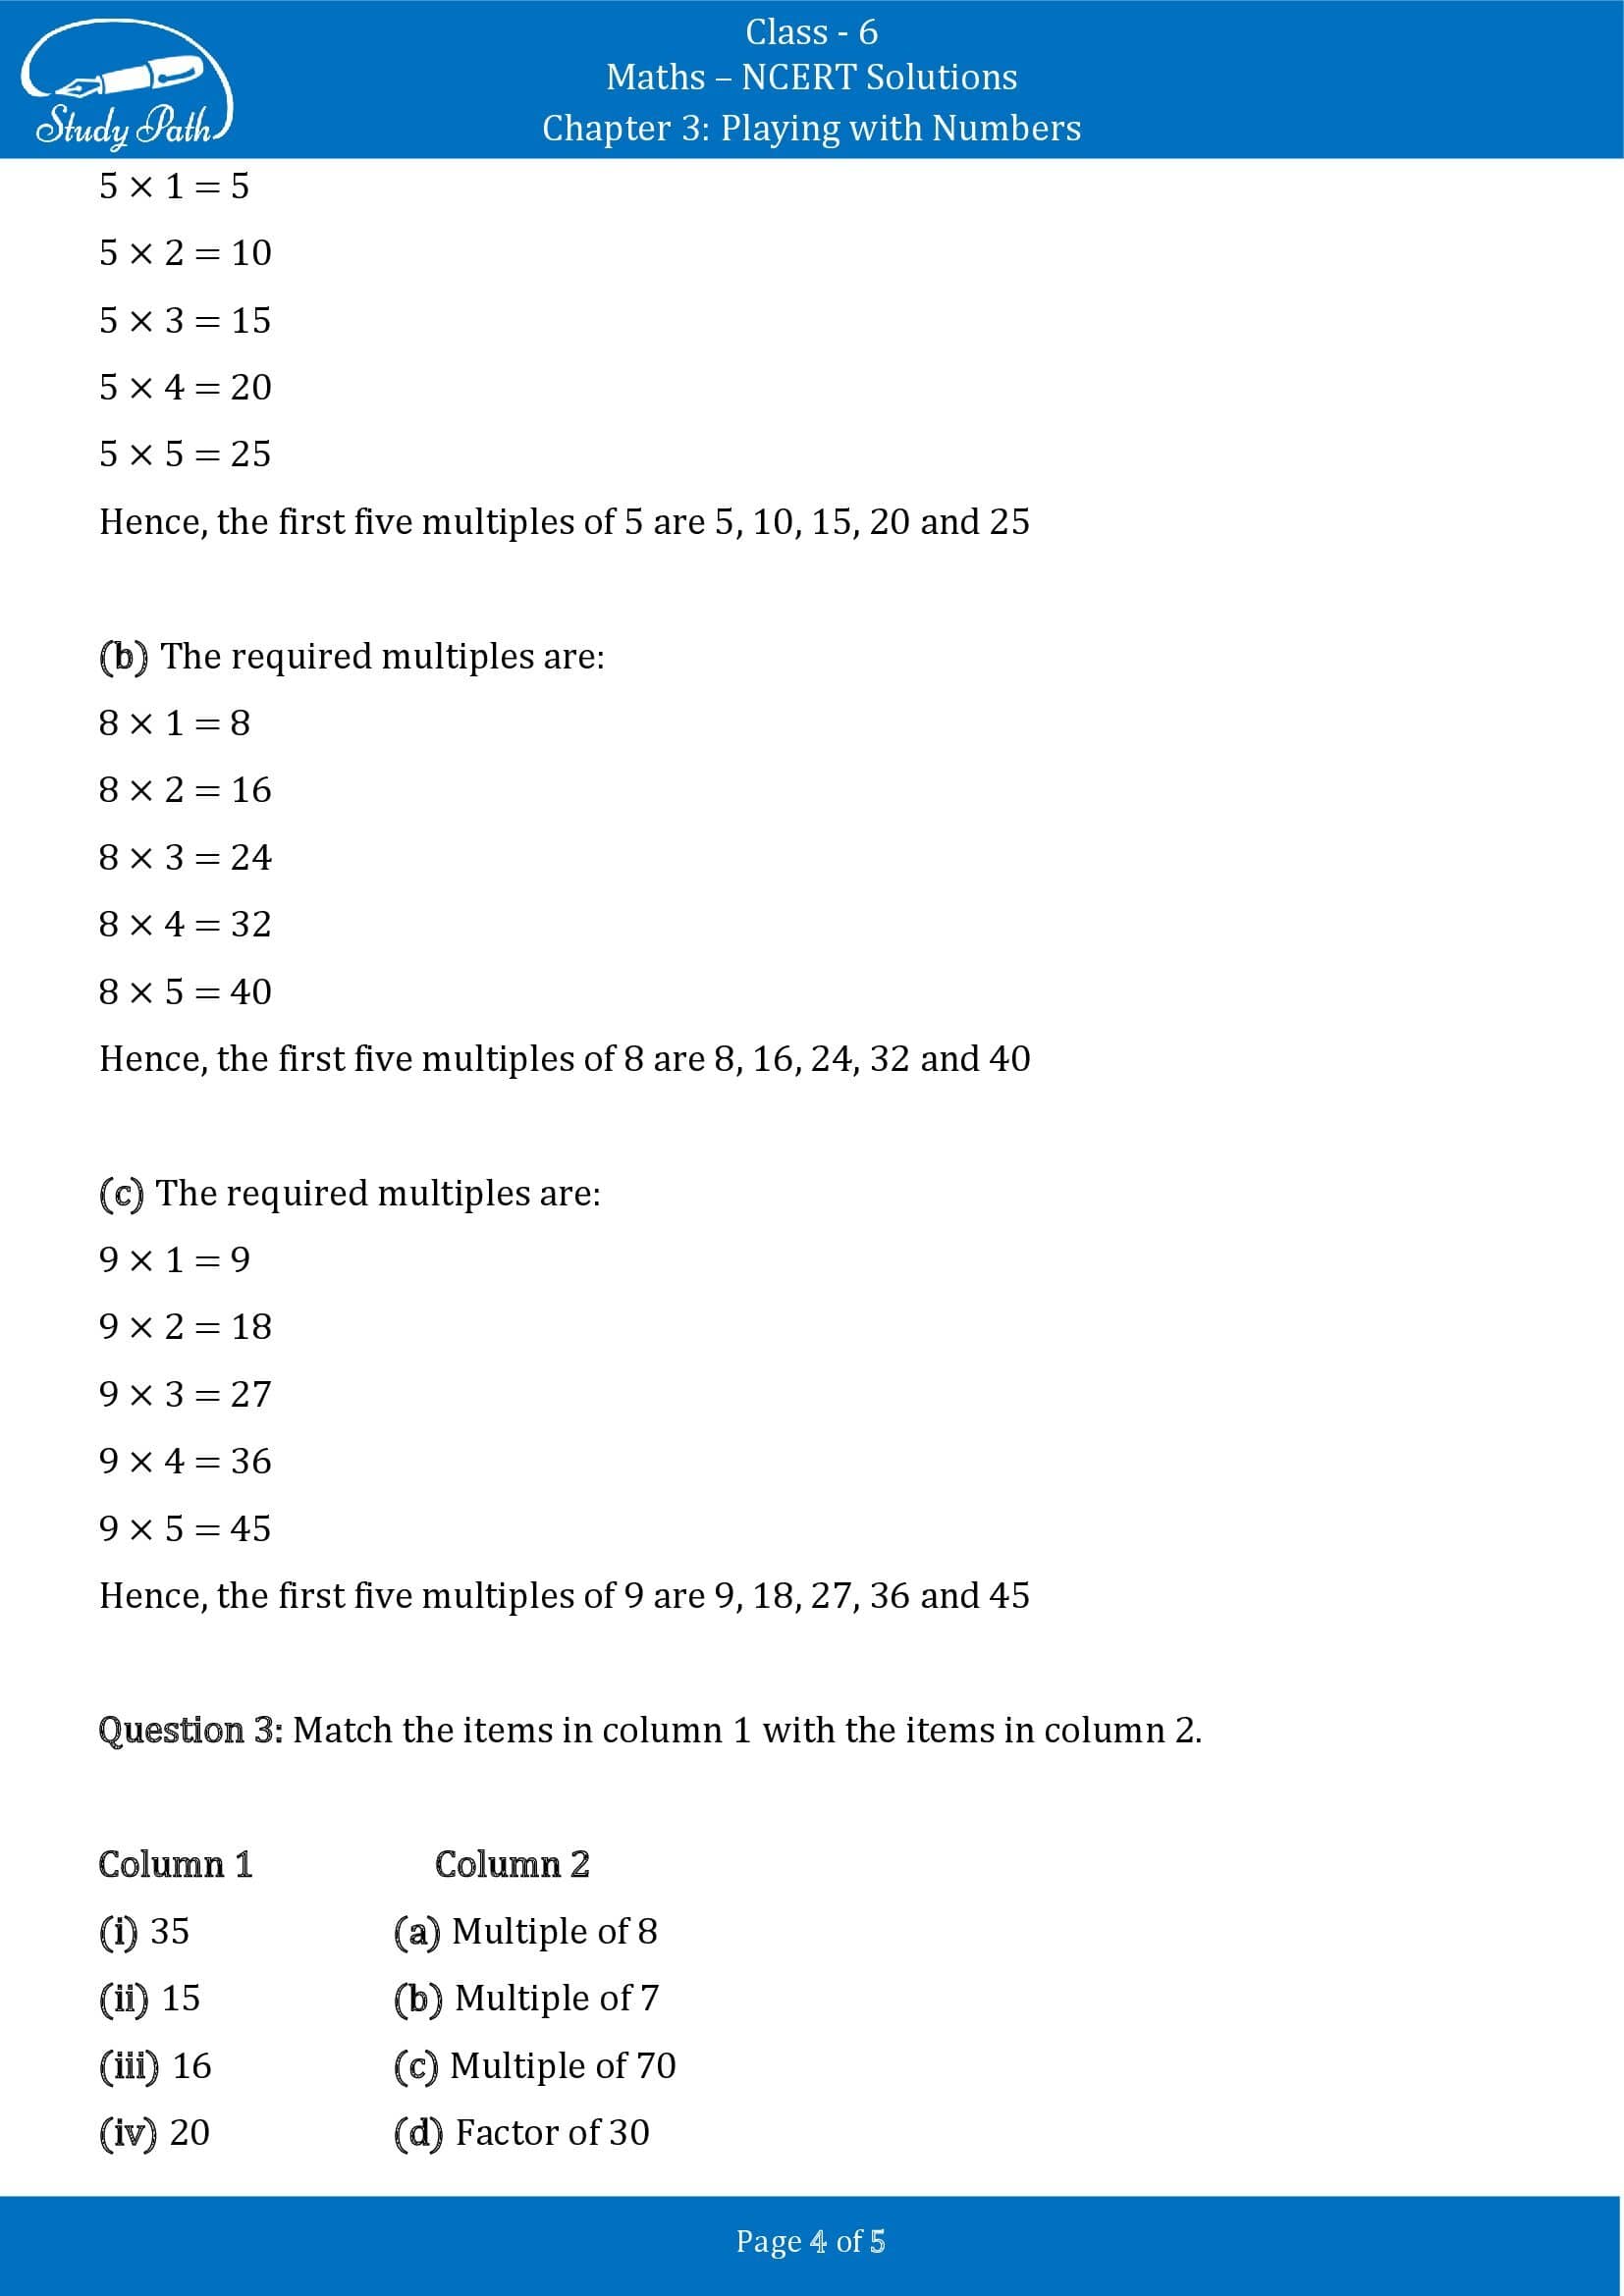 NCERT Solutions for Class 6 Maths Chapter 3 Playing with Numbers Exercise 3.1 00004